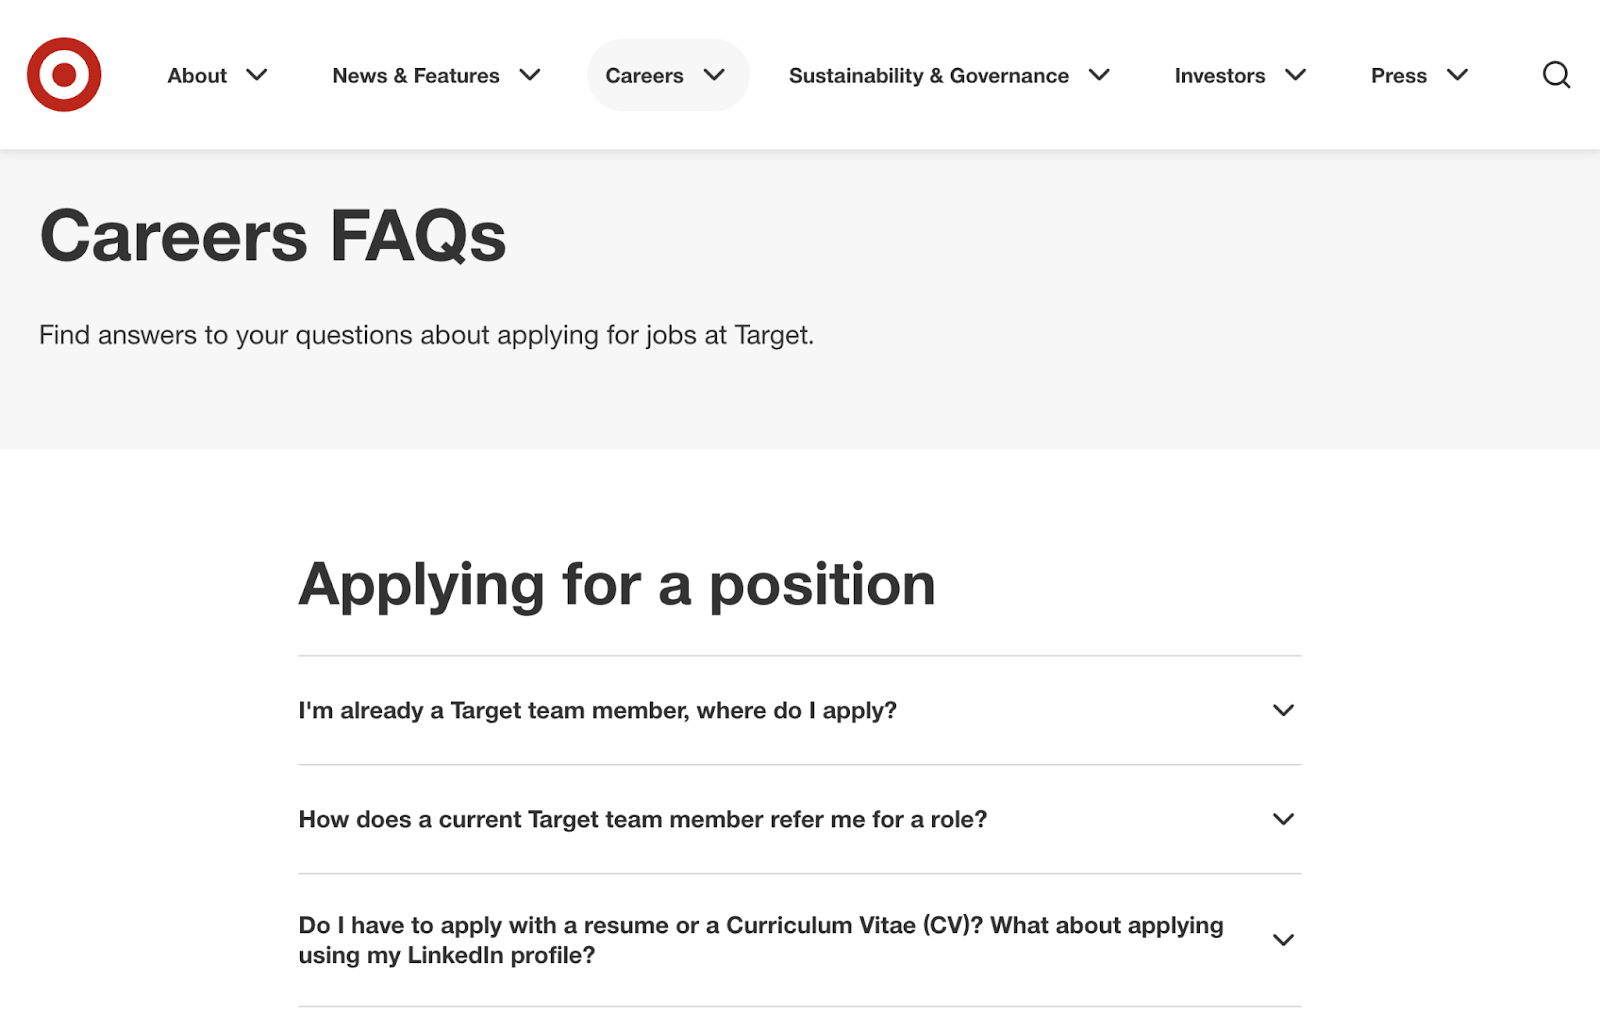 Target's career faq page answers questions about applying for a position